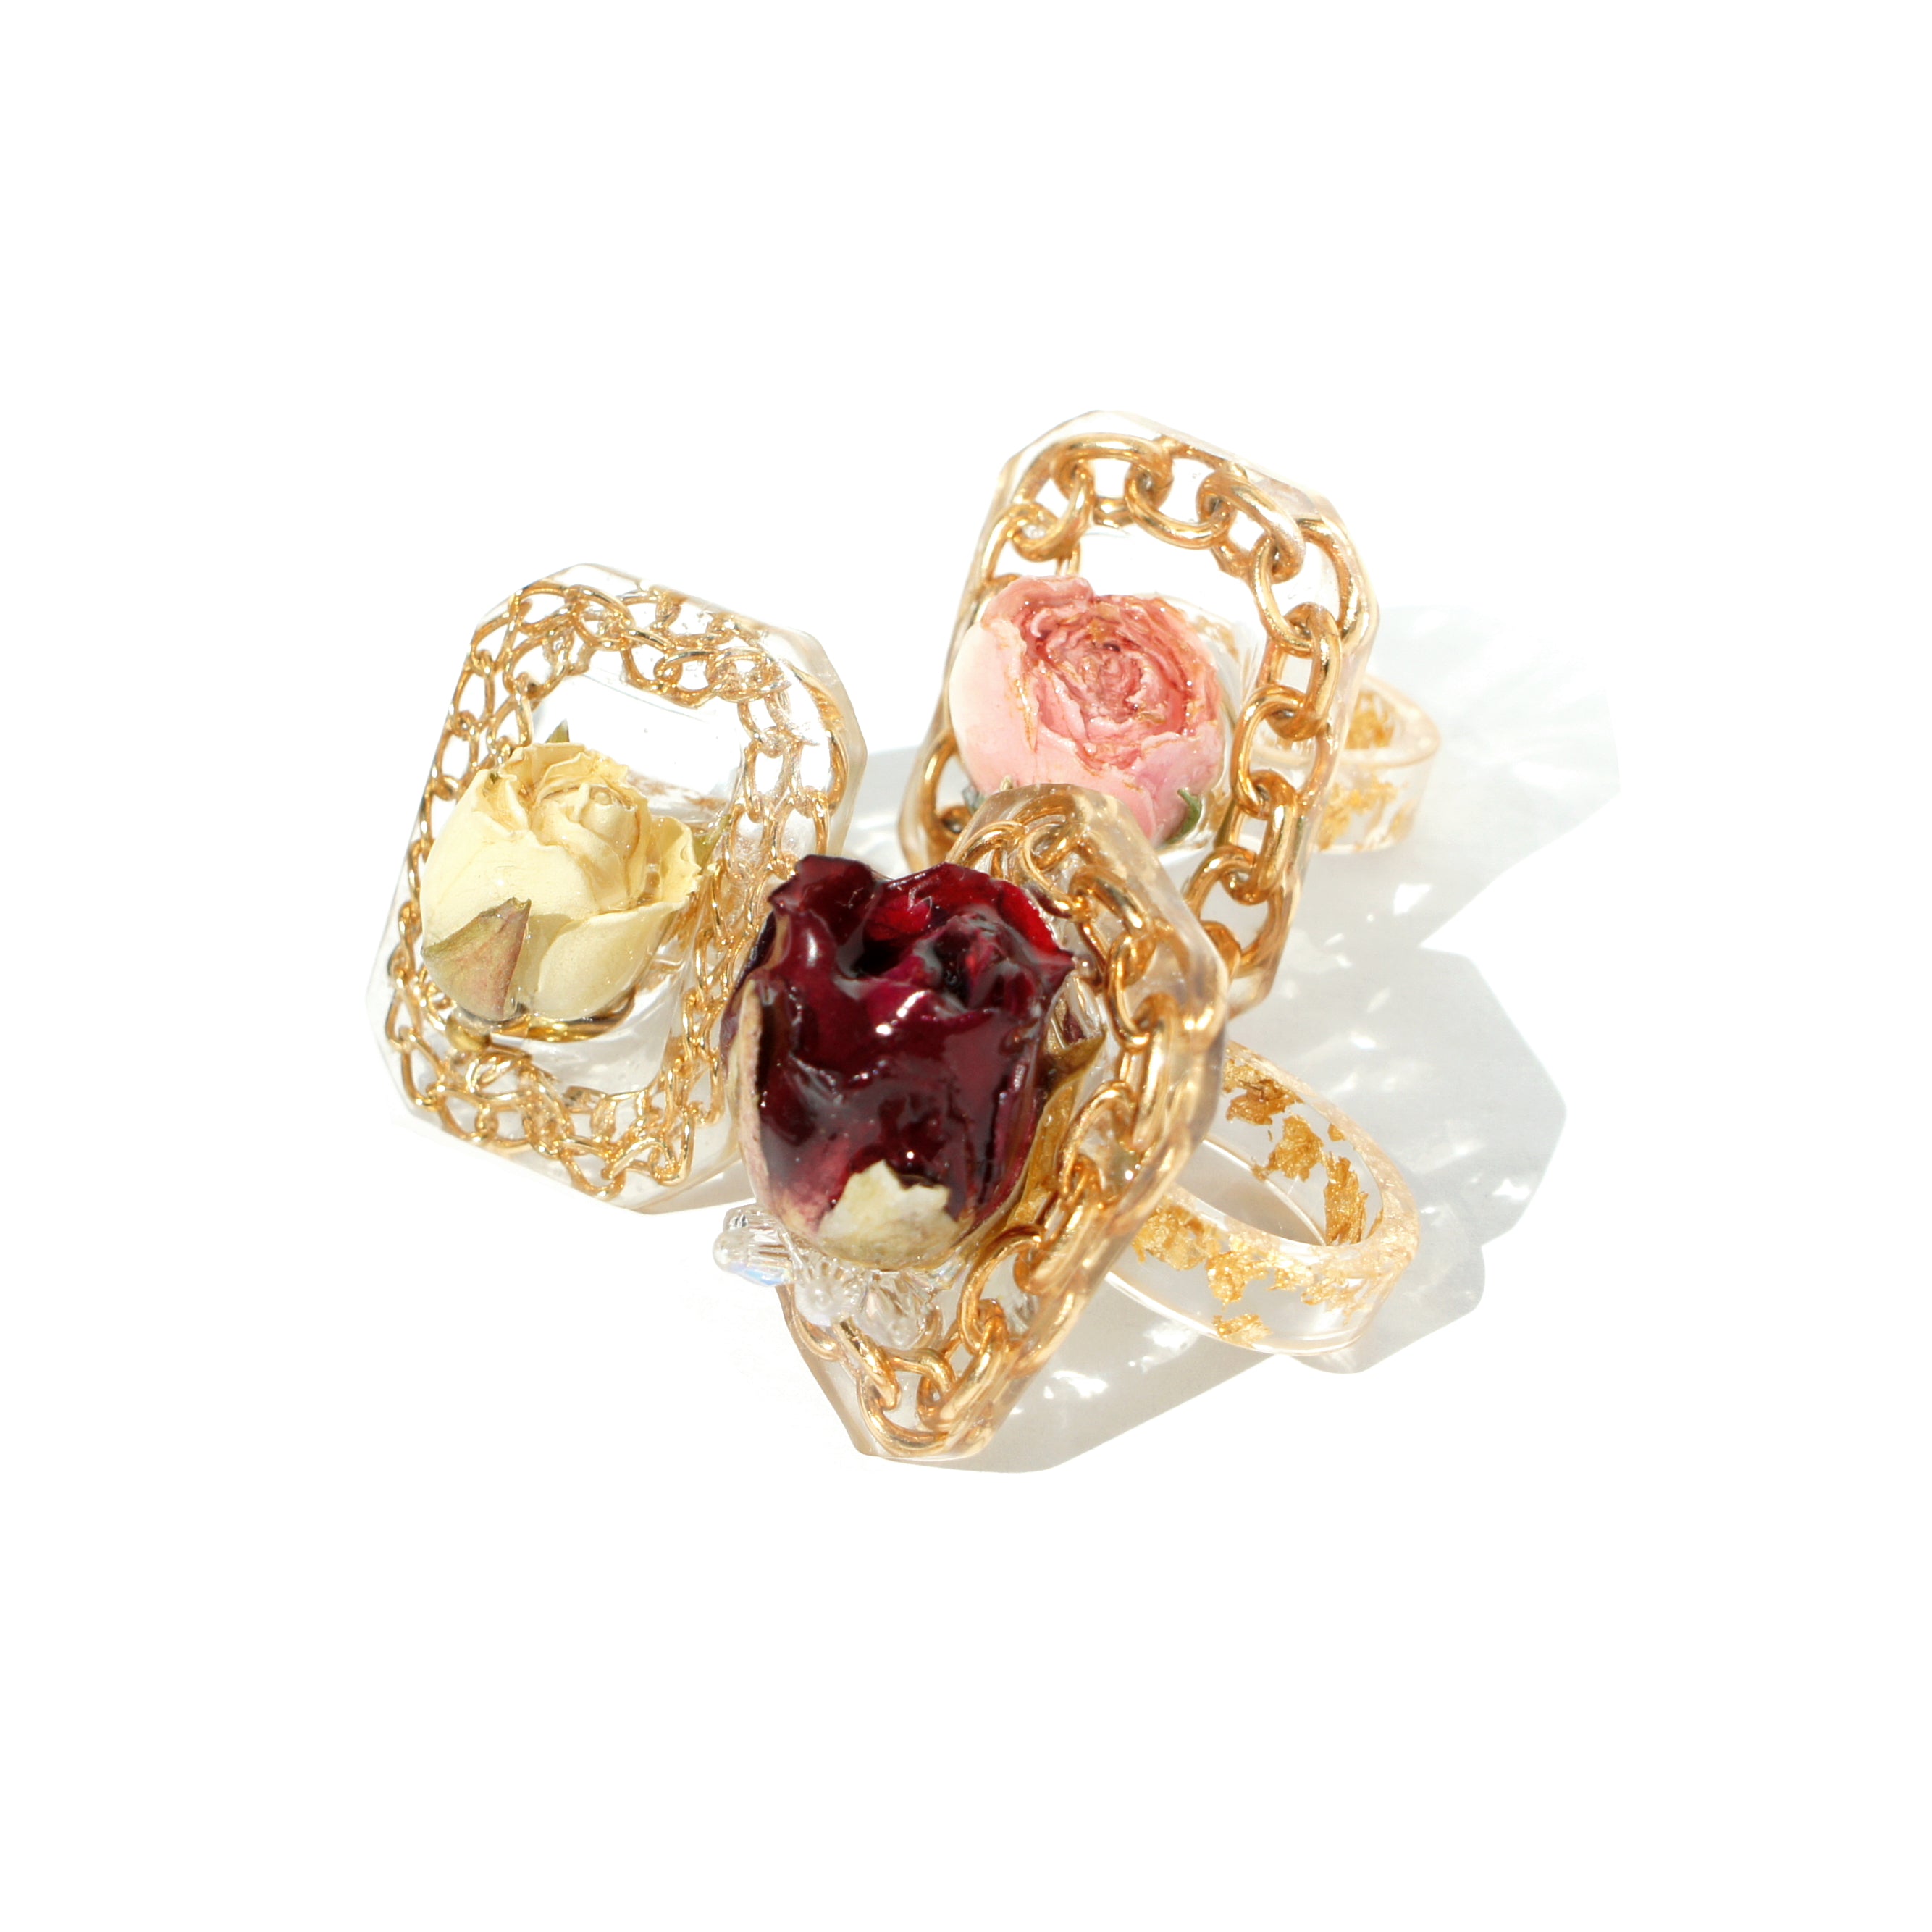 *REAL FLOWER* Queen Anne Rosebud and Chain Frame Ring